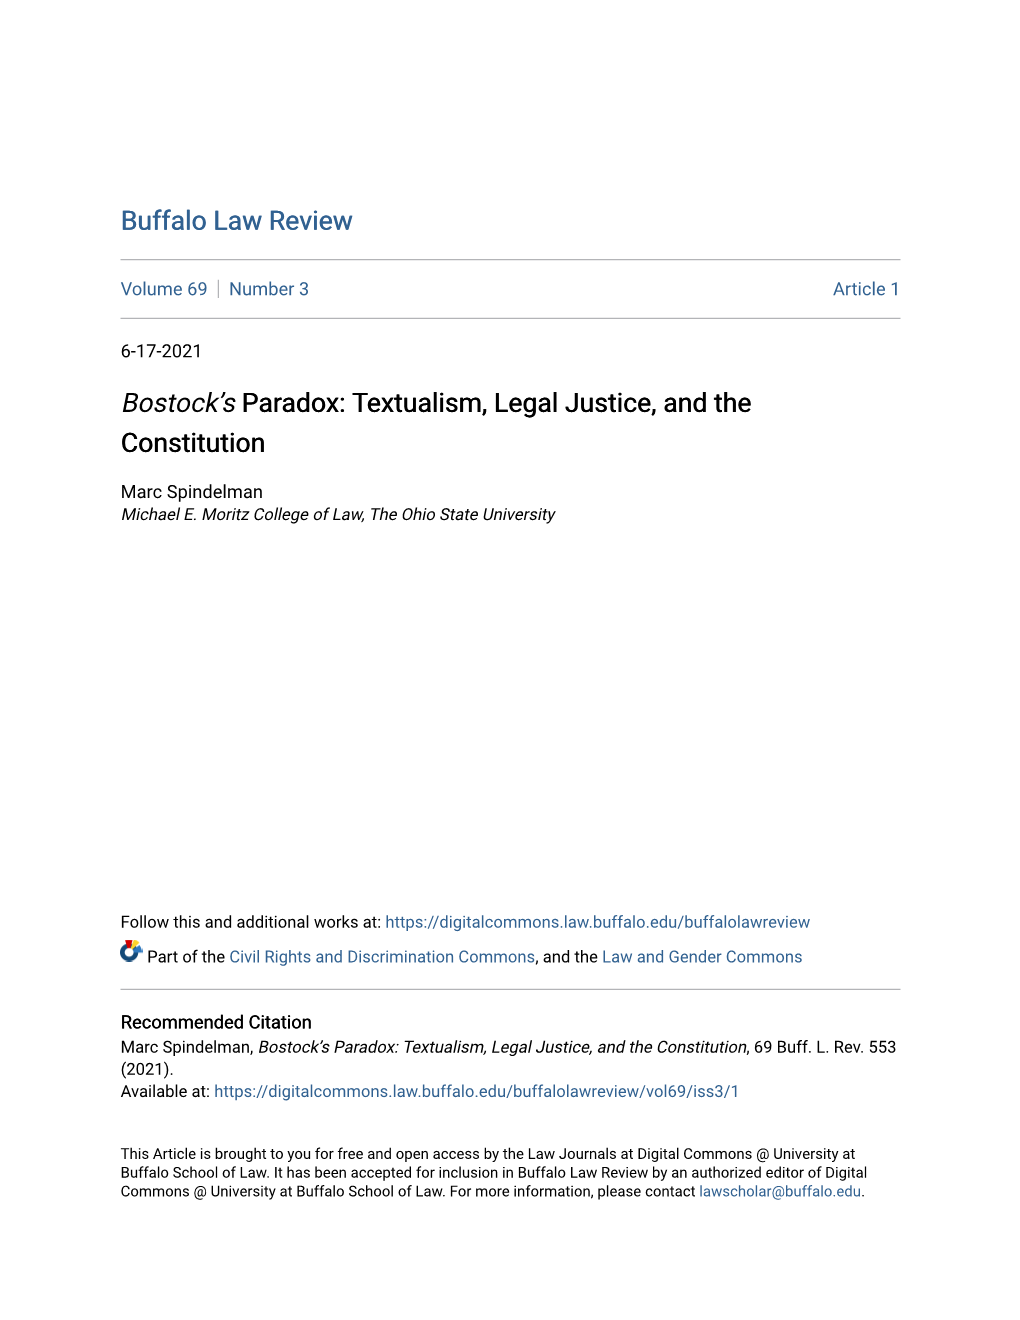 Bostock's Paradox: Textualism, Legal Justice, and the Constitution